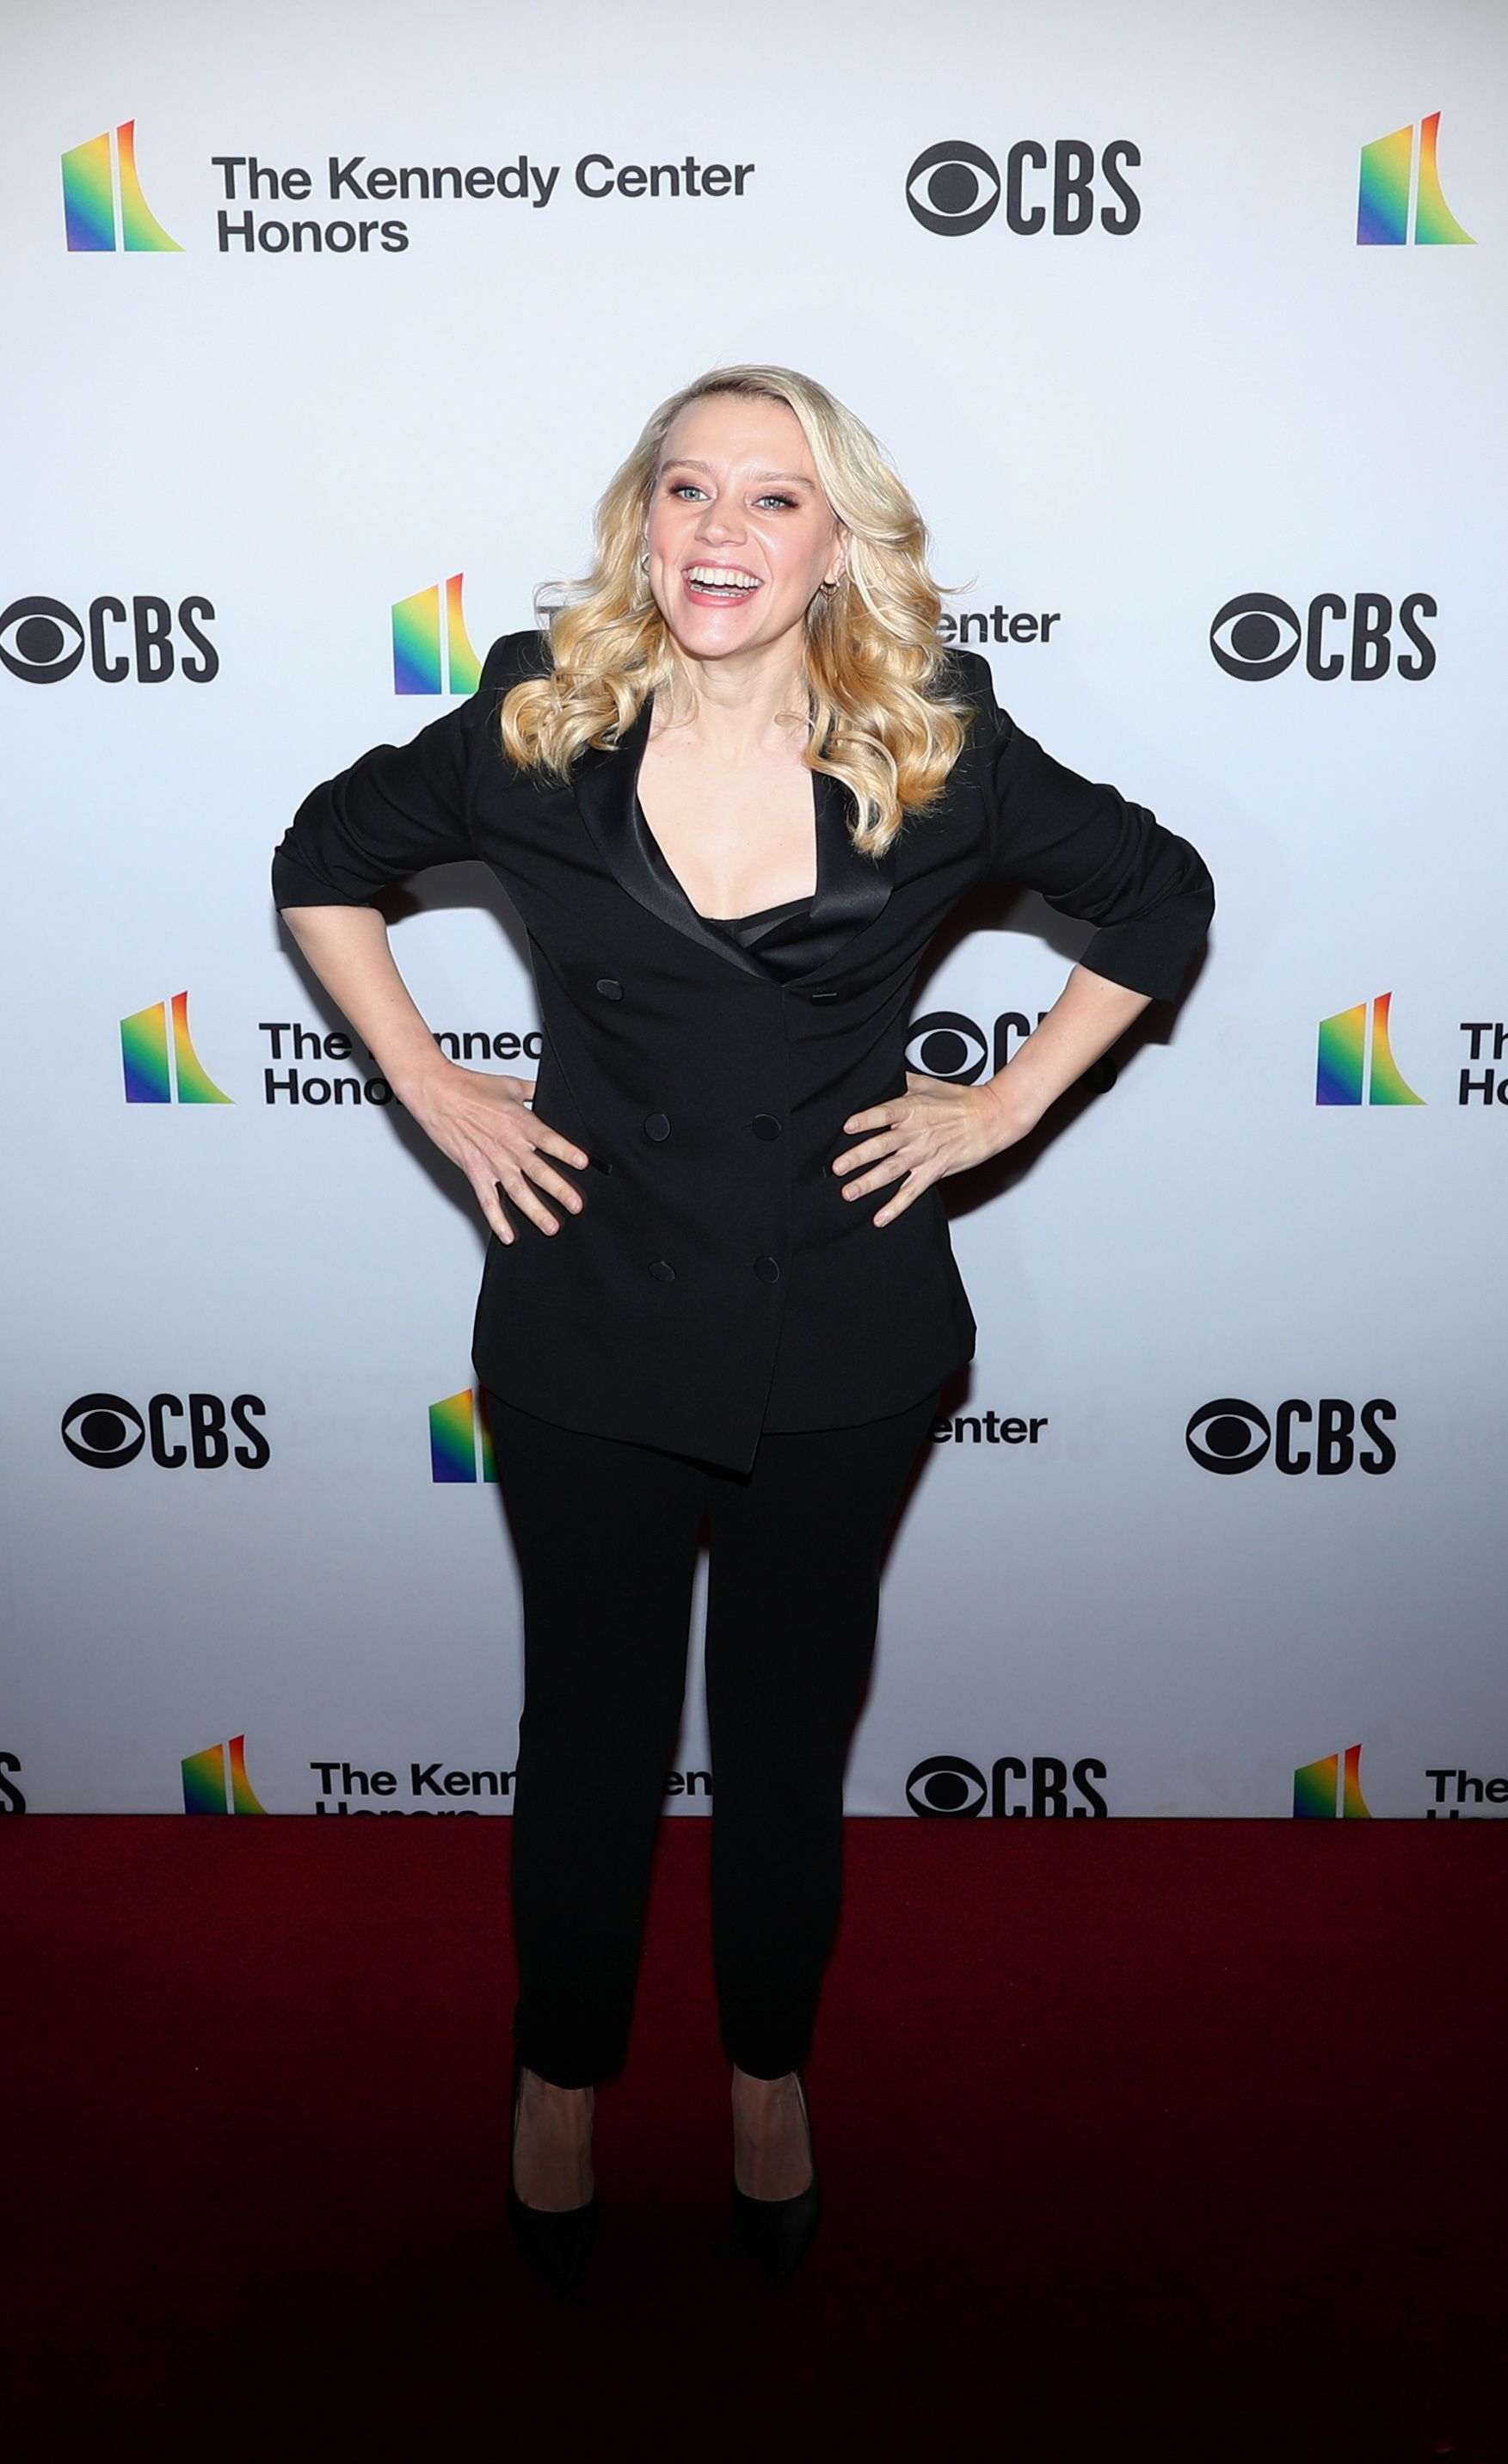 frivillig Radioaktiv uklar Adoring Kate McKinnon on Twitter: "📸 [9+ PICS] Our gallery has been  updated with pictures of Kate McKinnon at the 44th Kennedy Center Honors -  https://t.co/klaXa4kgqN https://t.co/TLYiYyDKS9" / Twitter